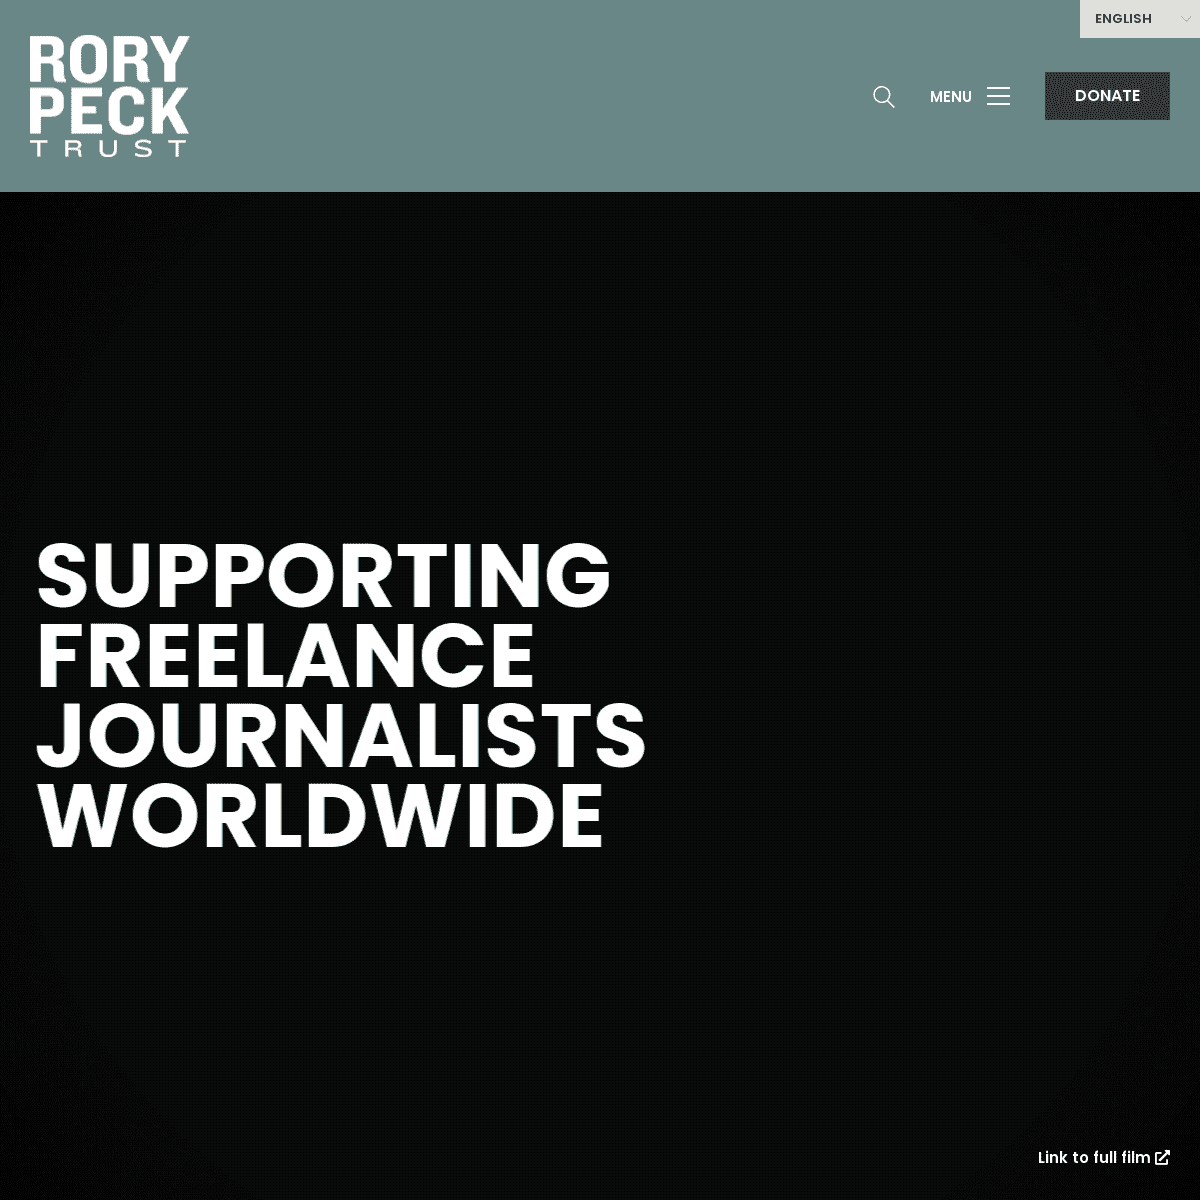 A complete backup of https://rorypecktrust.org